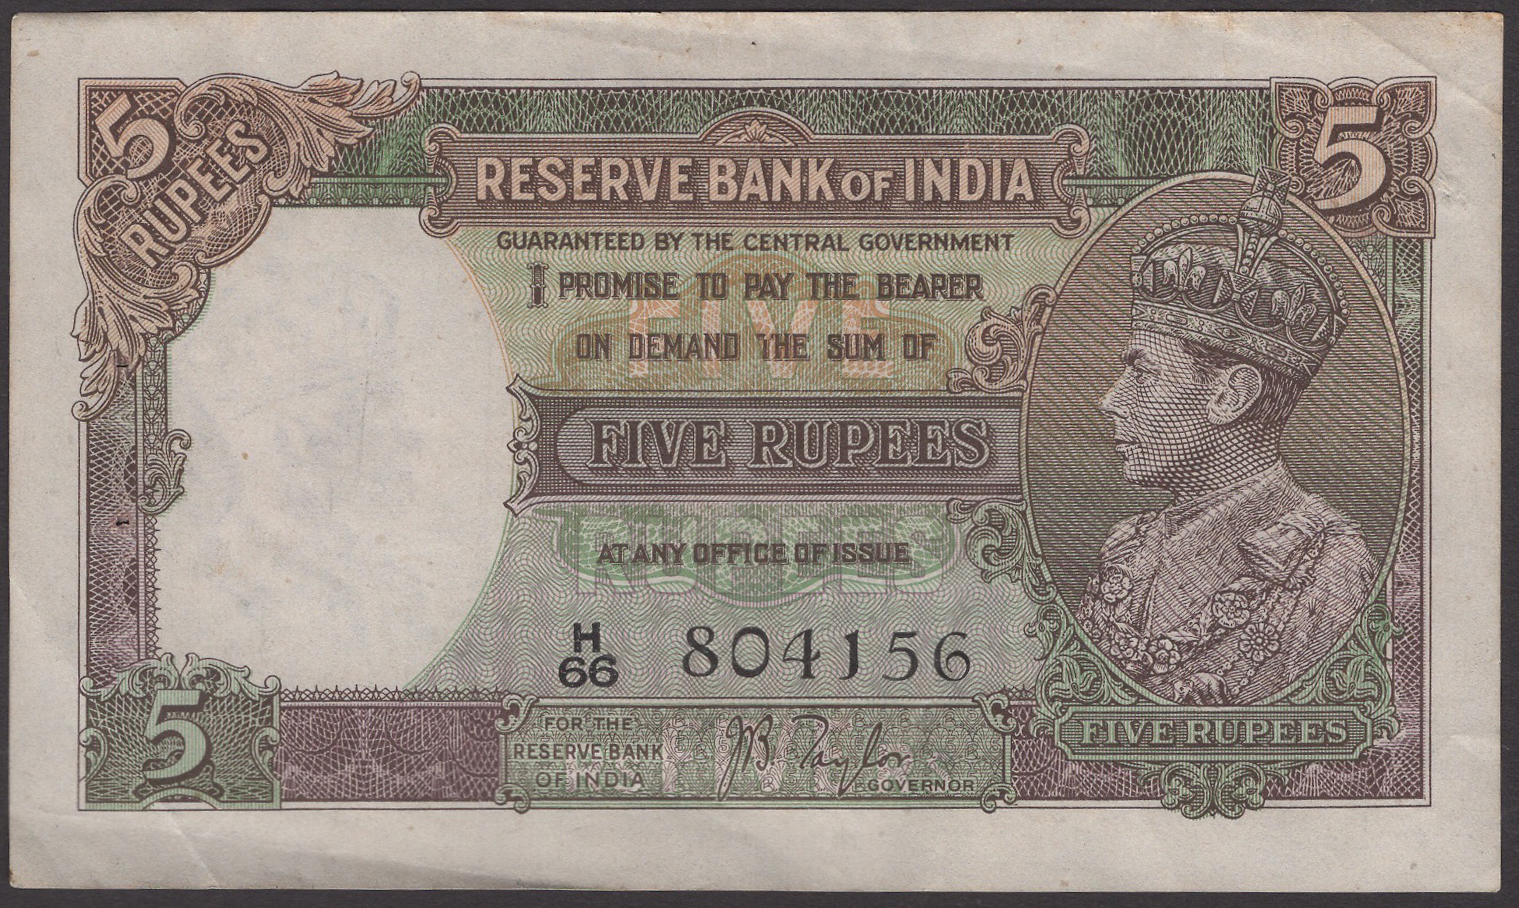 Reserve Bank of India, 5 Rupees (7), ND (1937), consecutive serial numbers H/66 804150-56,... - Bild 5 aus 6